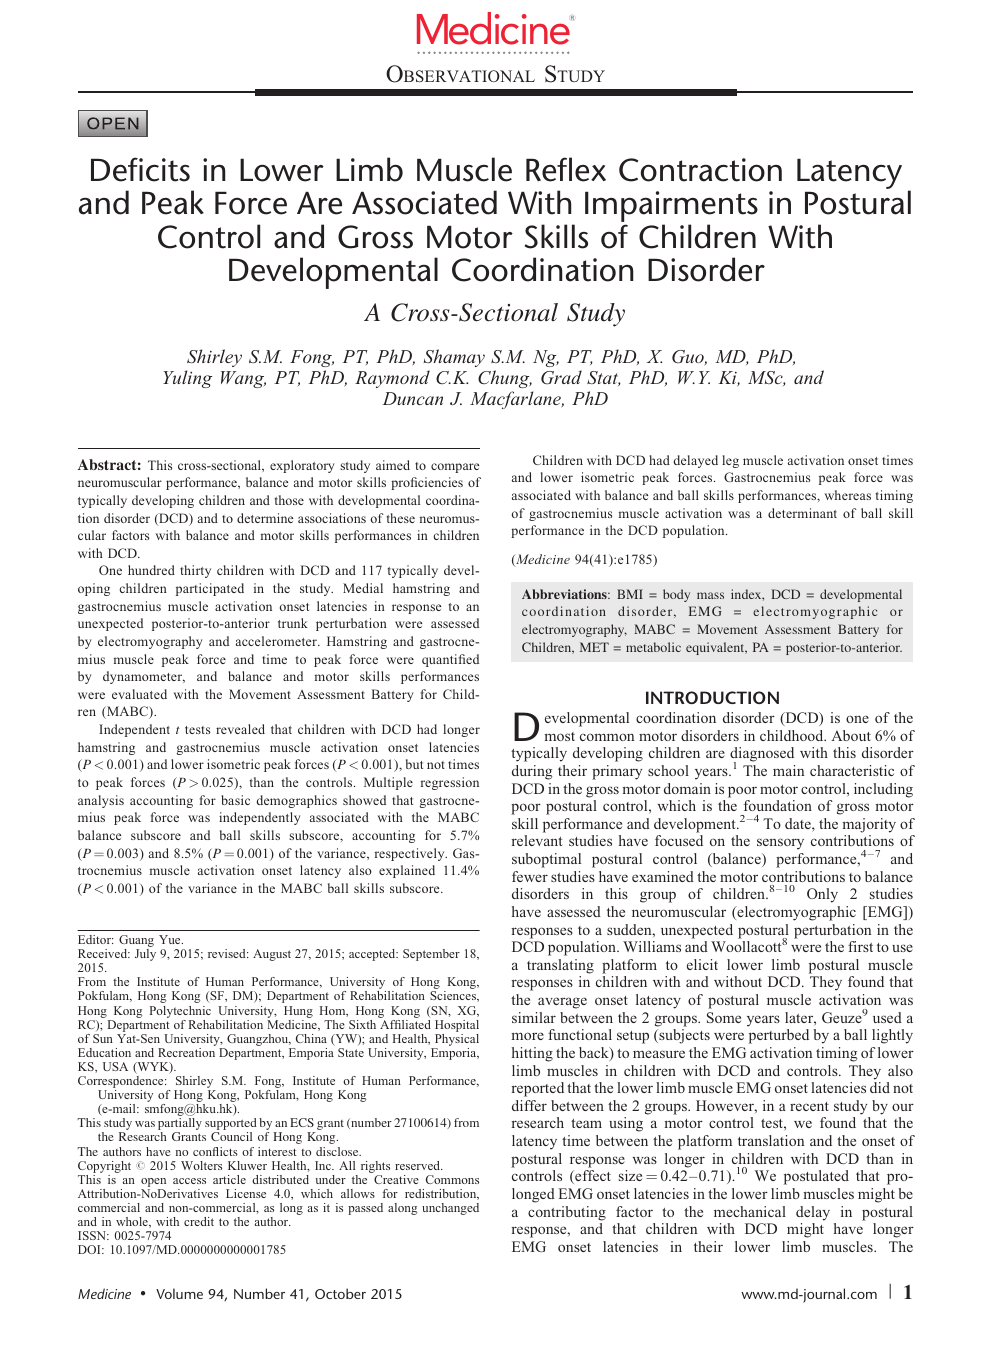 Deficits In Lower Limb Muscle Reflex Contraction Latency And Peak Force Are Associated With Impairments In Postural Control And Gross Motor Skills Of Children With Developmental Coordination Disorder Topic Of Research